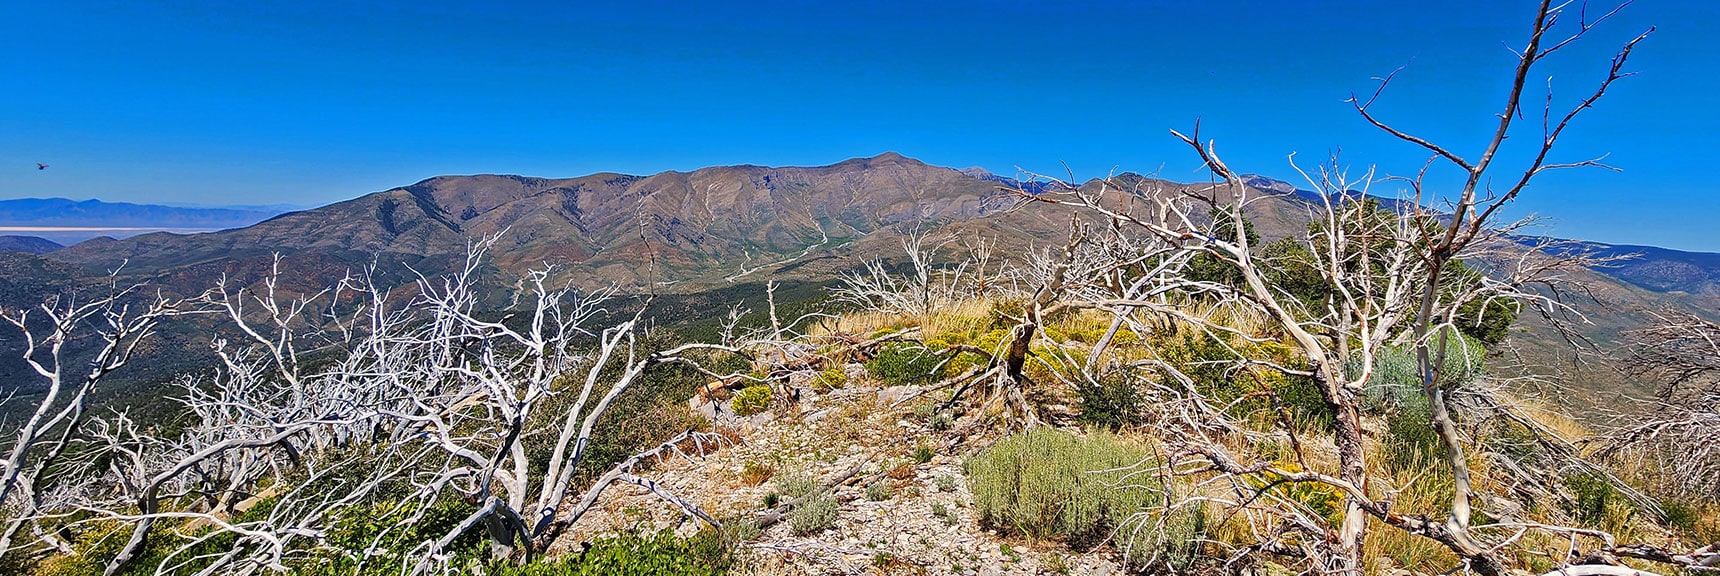 Sexton Ridge to Griffith Peak from Southern High Point | Wilson Ridge Lower Loop | Lovell Canyon, Nevada